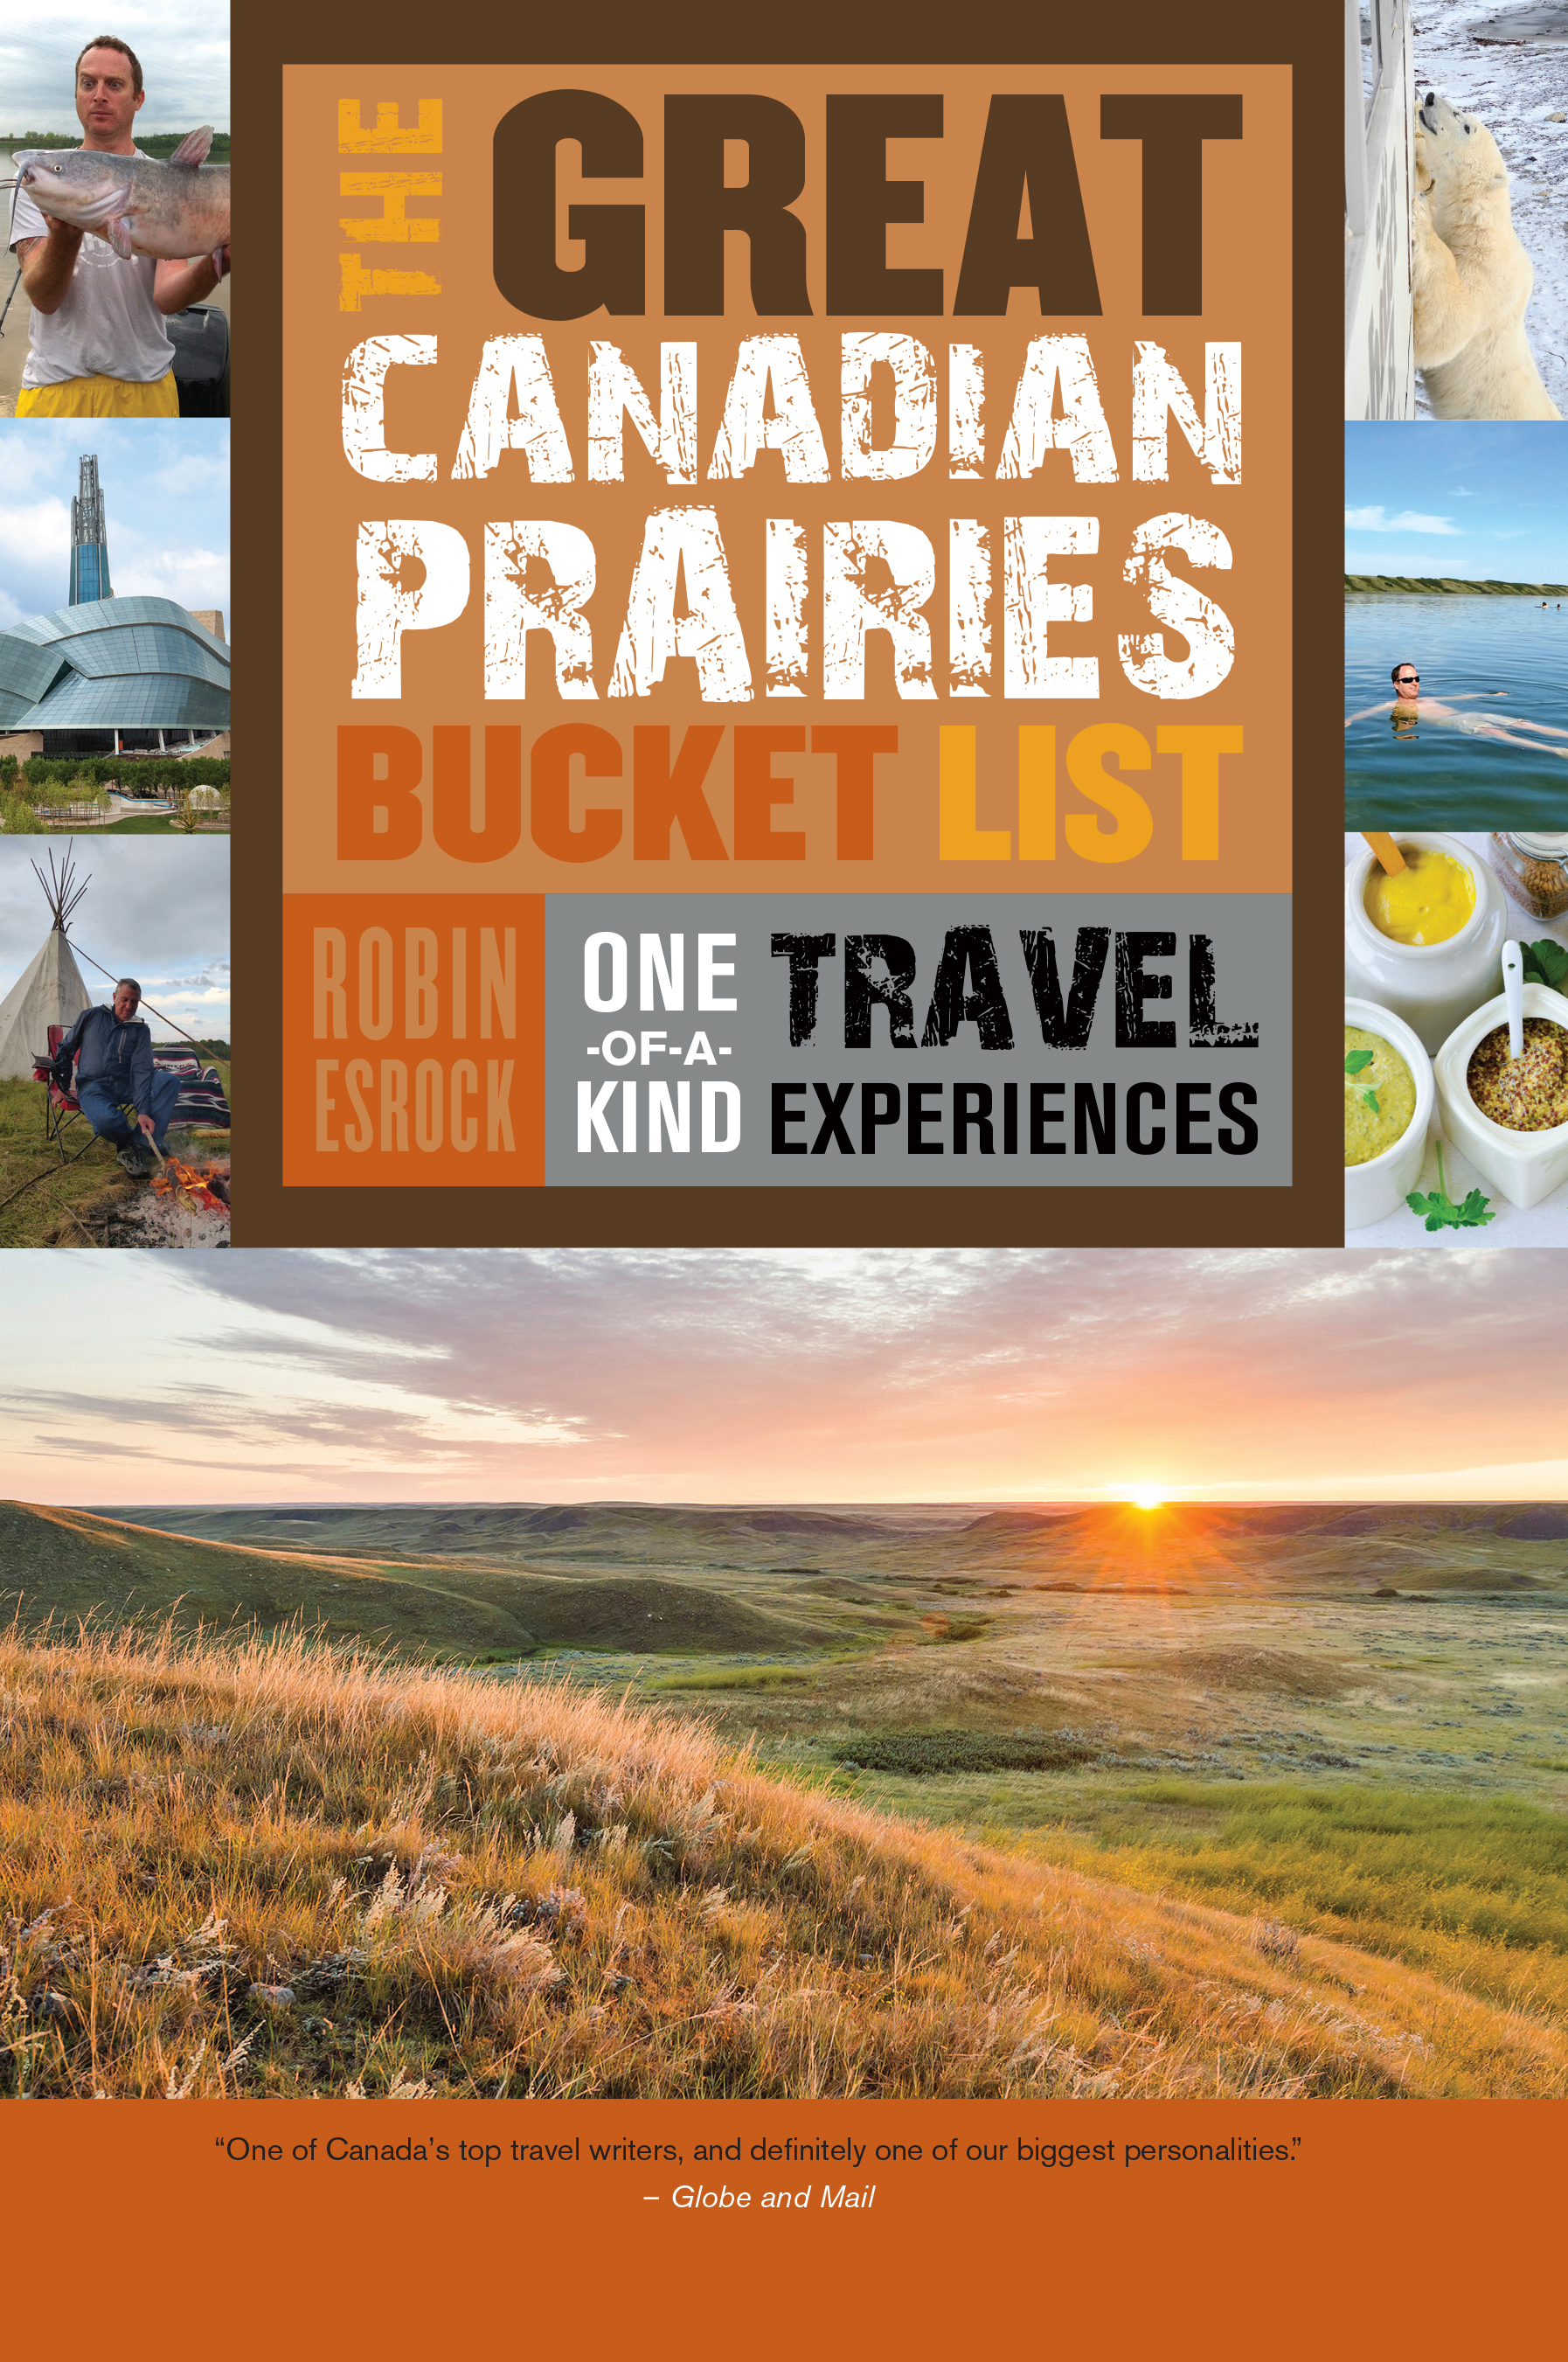 The traveling kind. Canadian Prairies. Zom 100: Bucket list of the Dead.